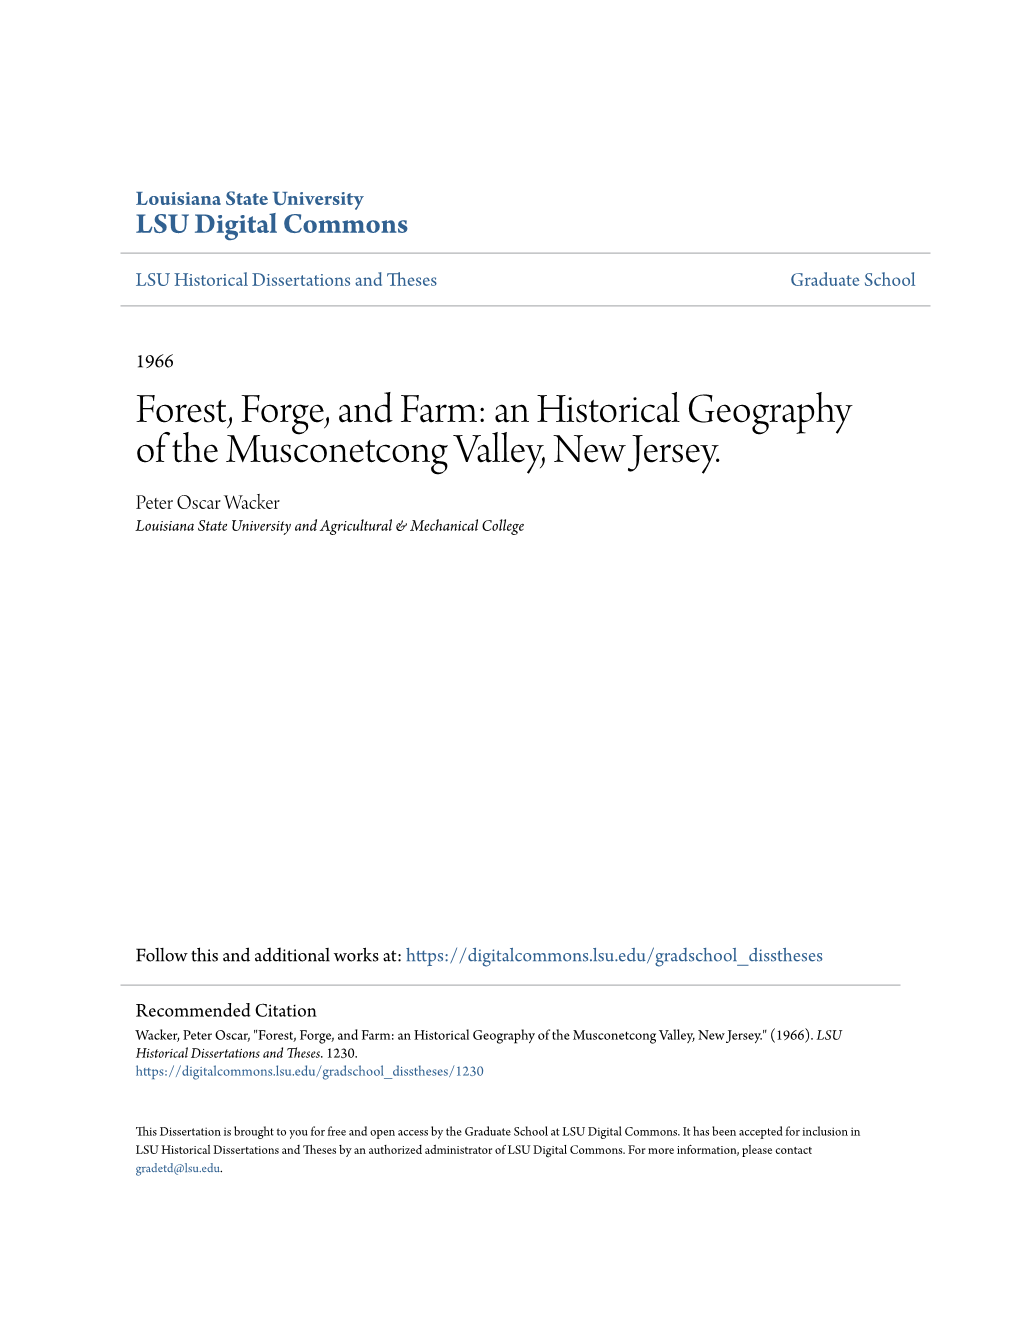 An Historical Geography of the Musconetcong Valley, New Jersey. Peter Oscar Wacker Louisiana State University and Agricultural & Mechanical College